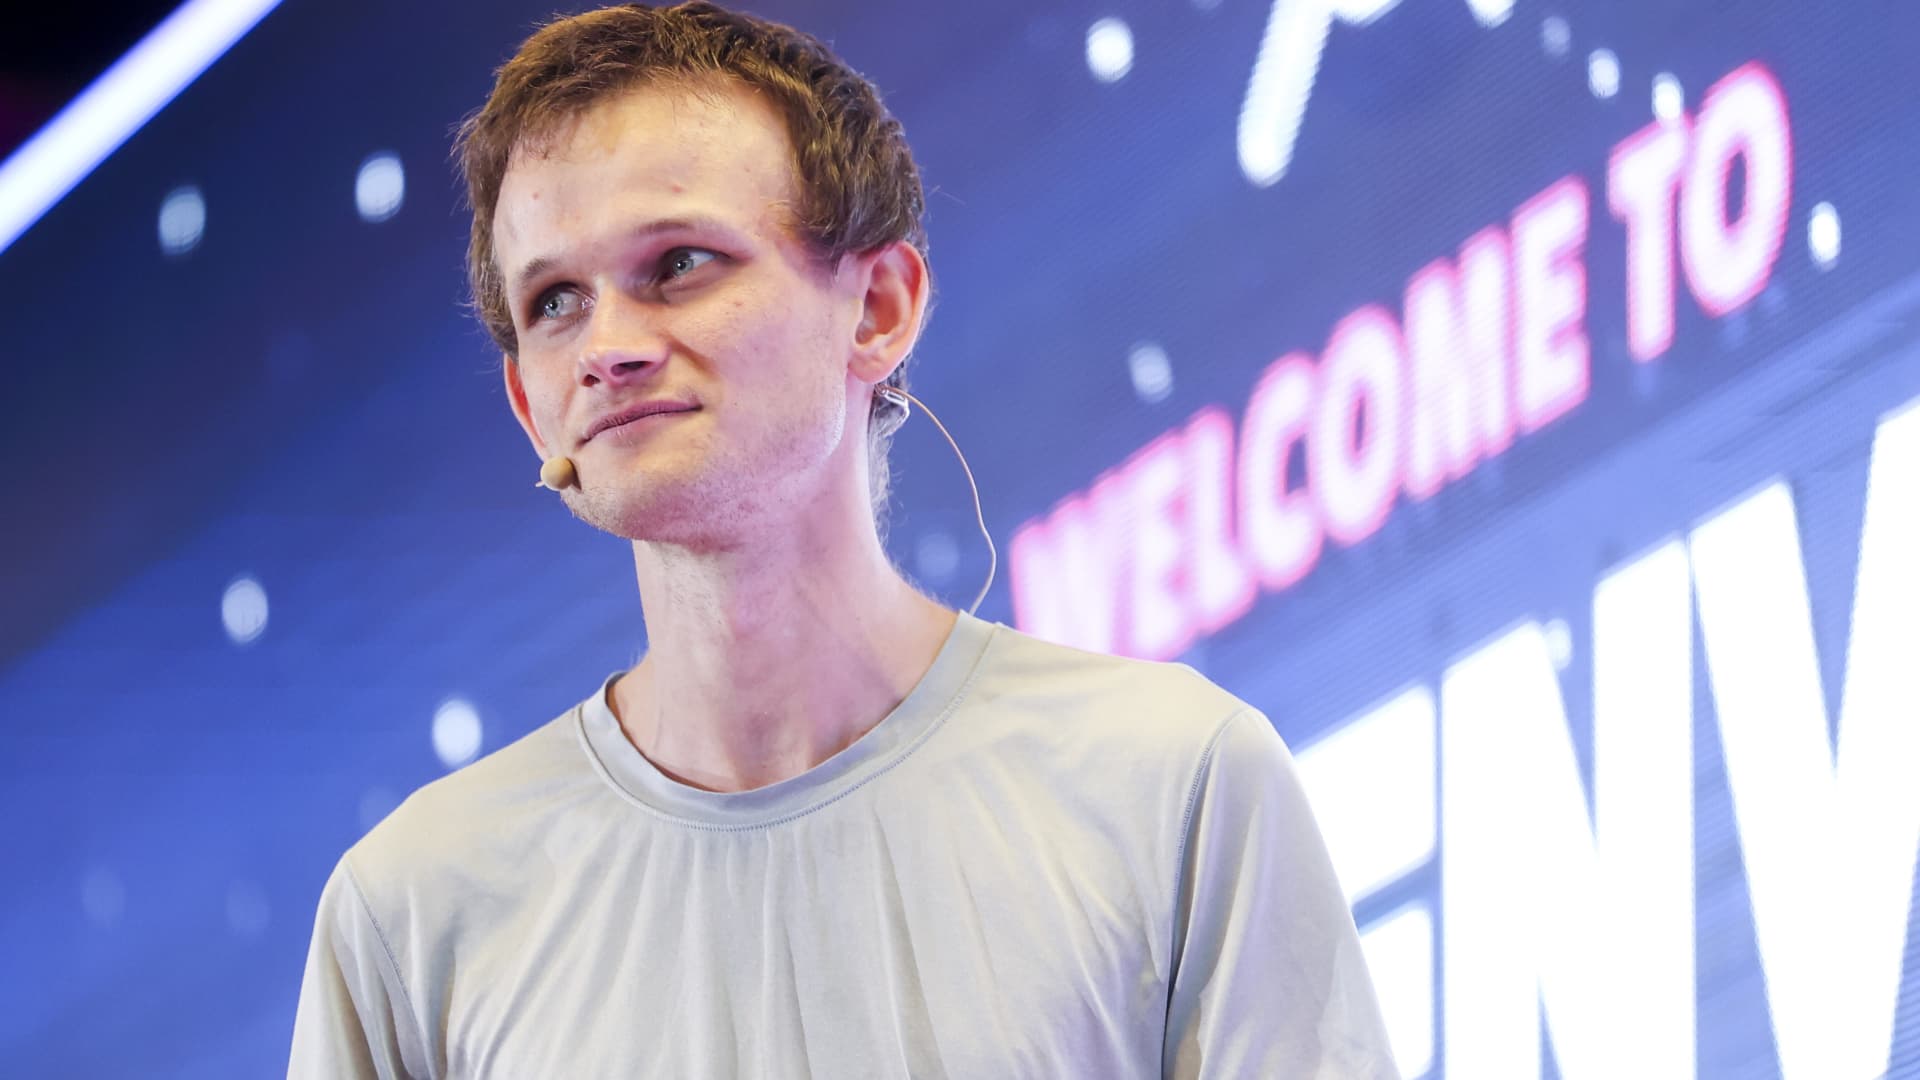 Vitalik Buterin has introduced a new Ethereum proposal EIP-7702 to drive sustainable smart contract wallet functionality.